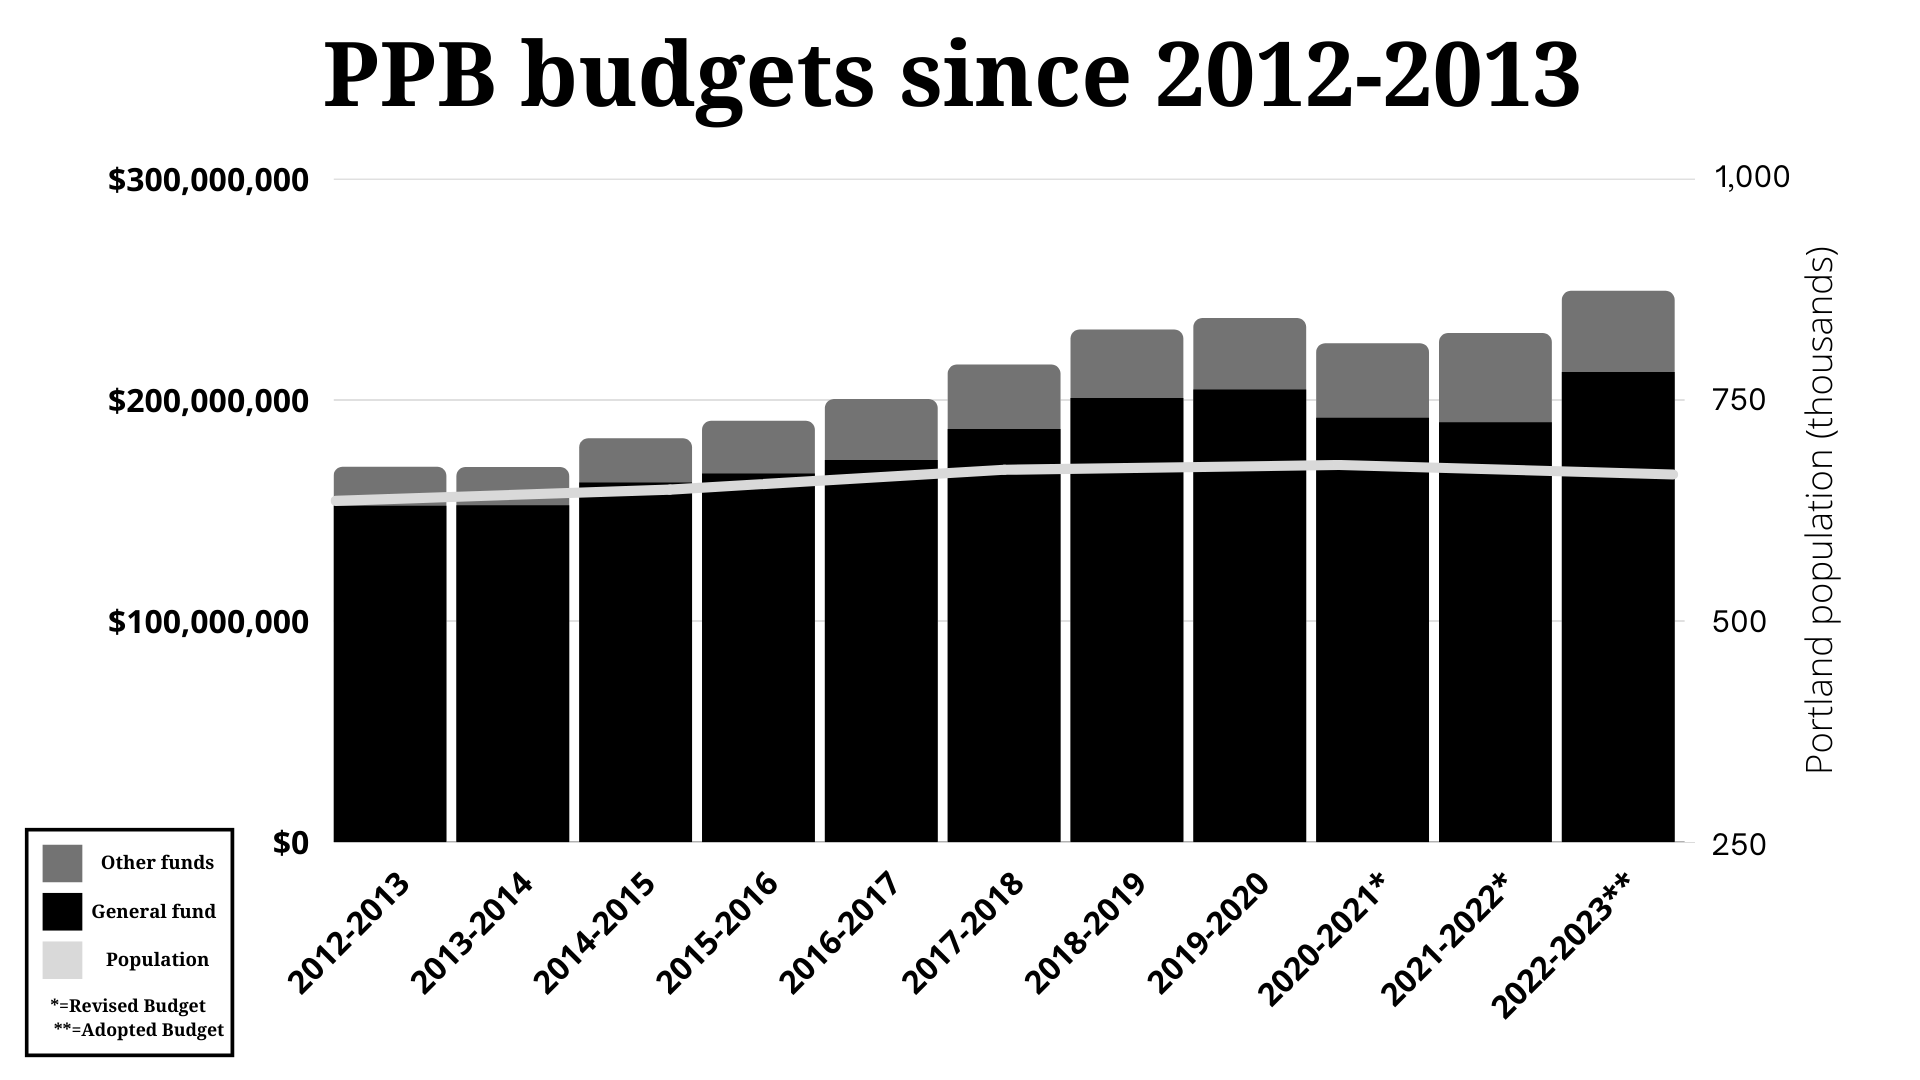 A bar graph shows PPB budgets since the 2012-2013 fiscal year up to 2022-2023